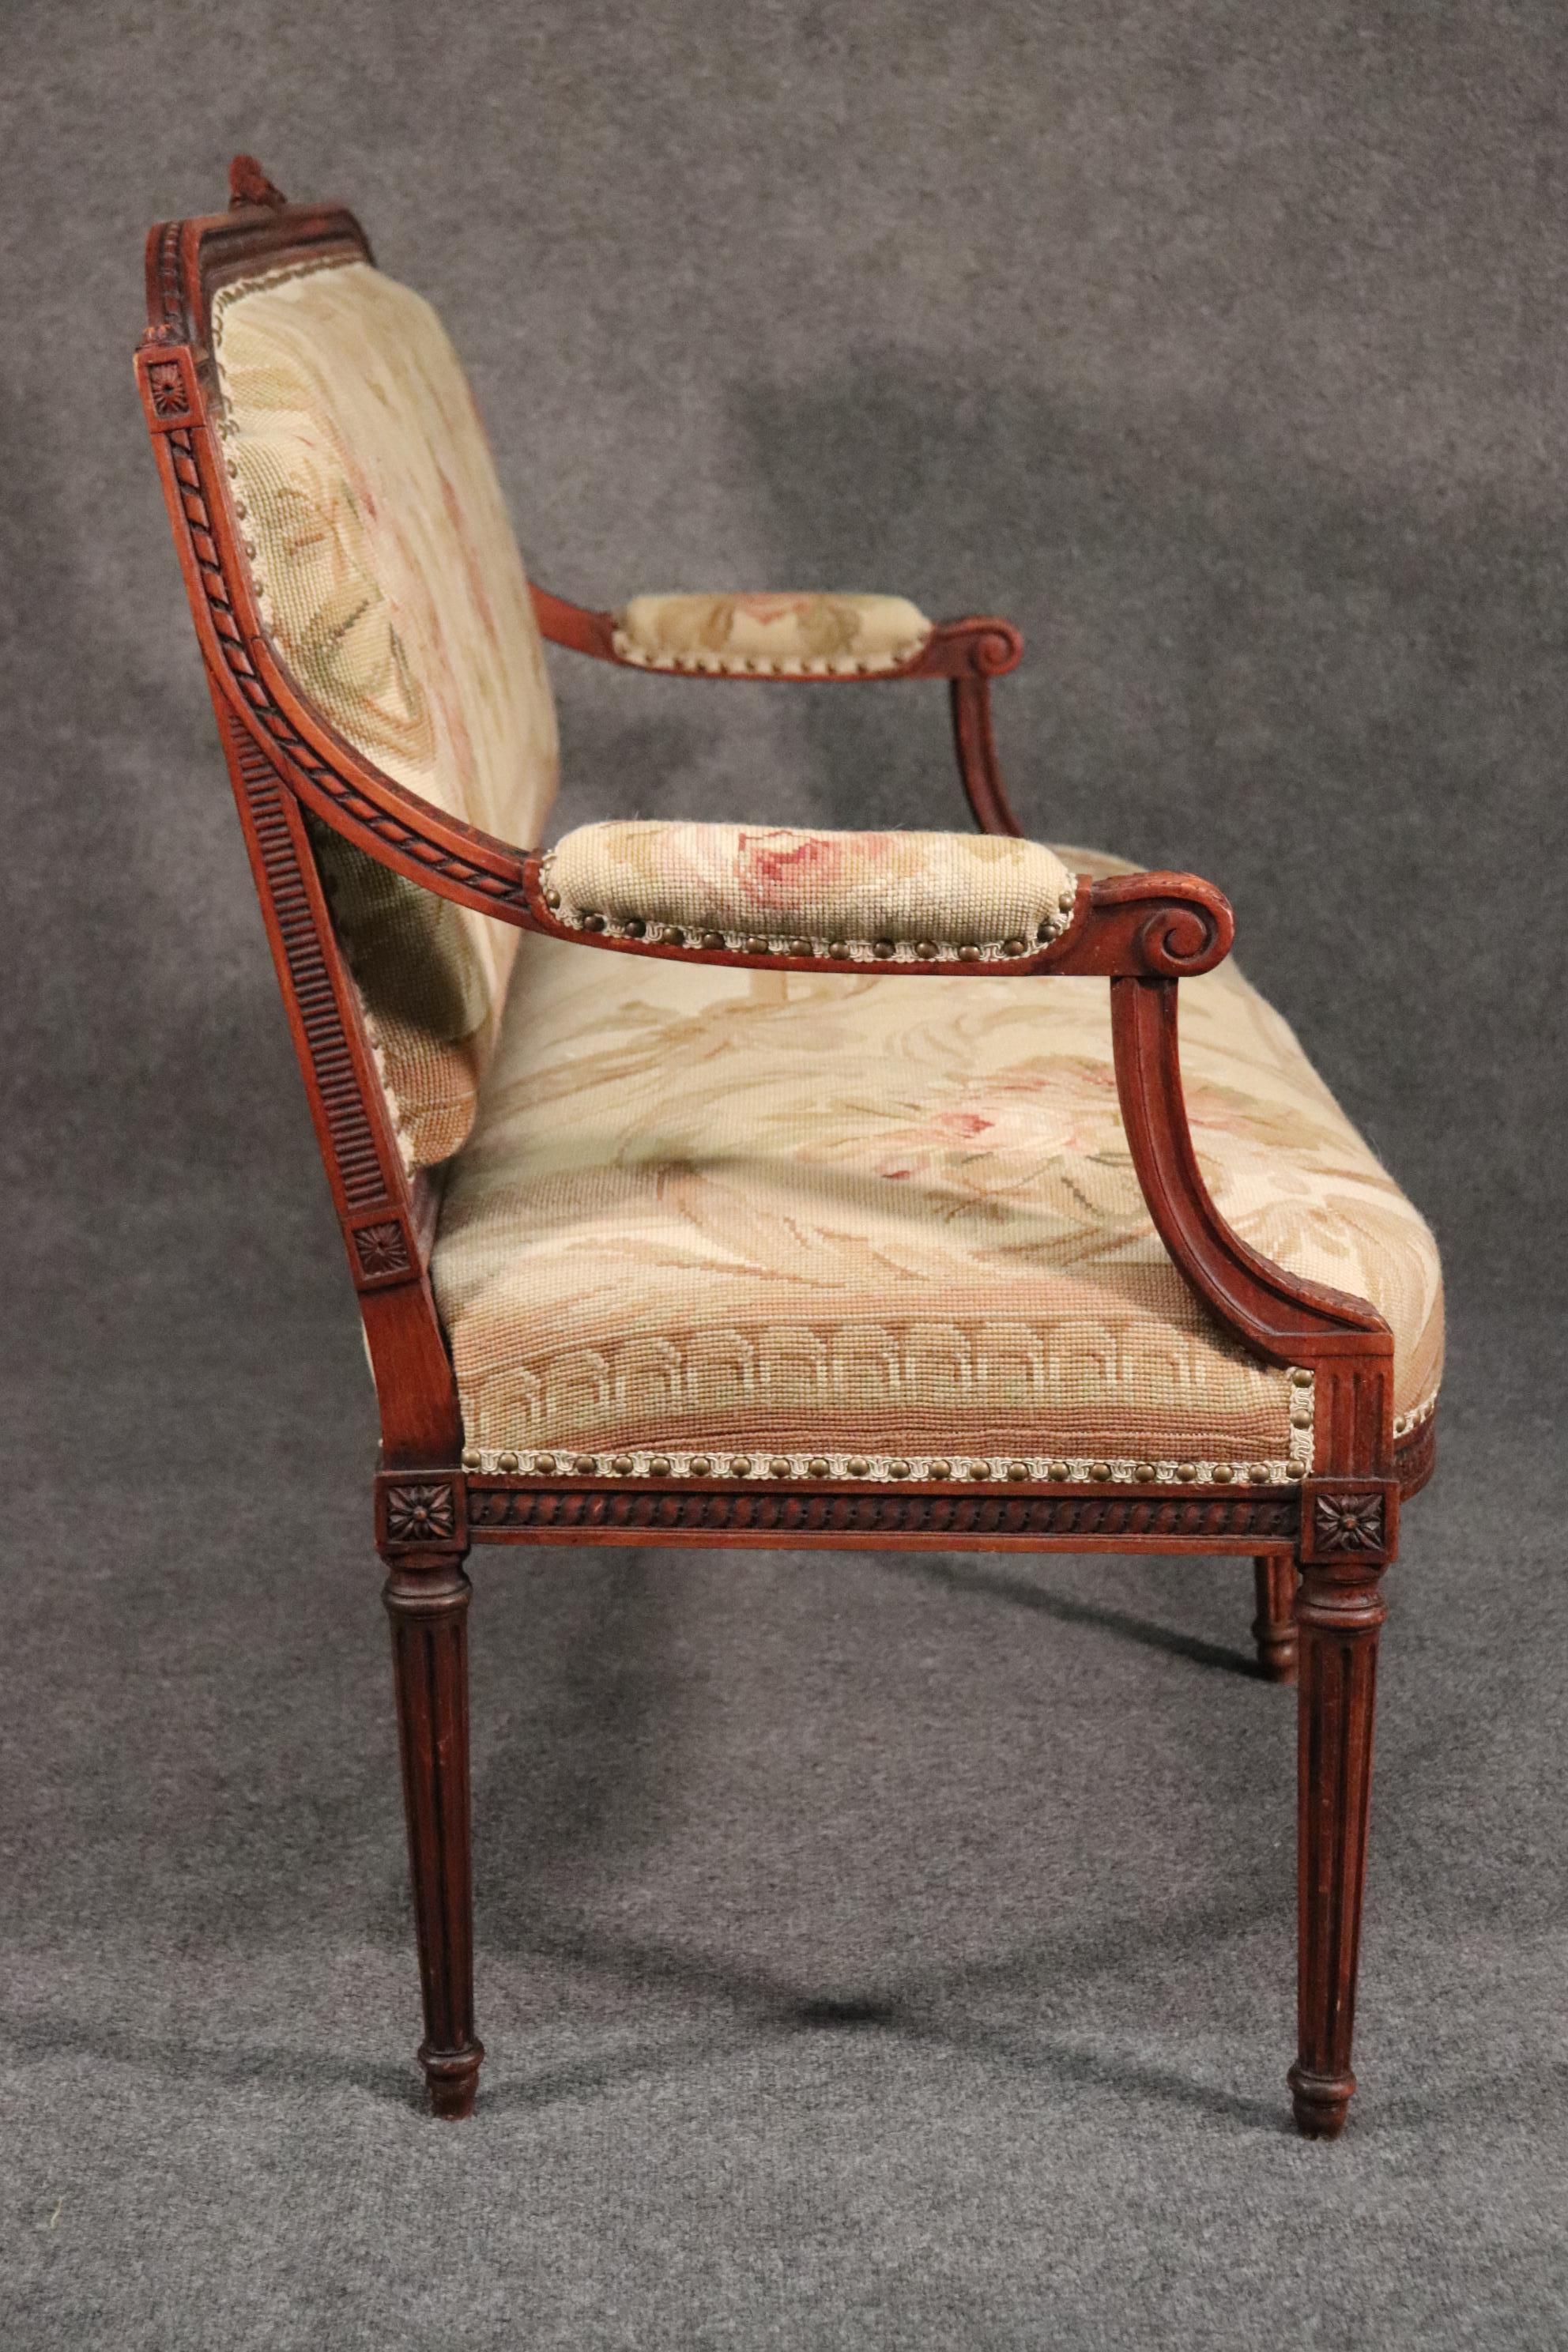 Mid-20th Century French Louis XVI Style Walnut Settee Canape with Tapestry Upholstery, circa 1930